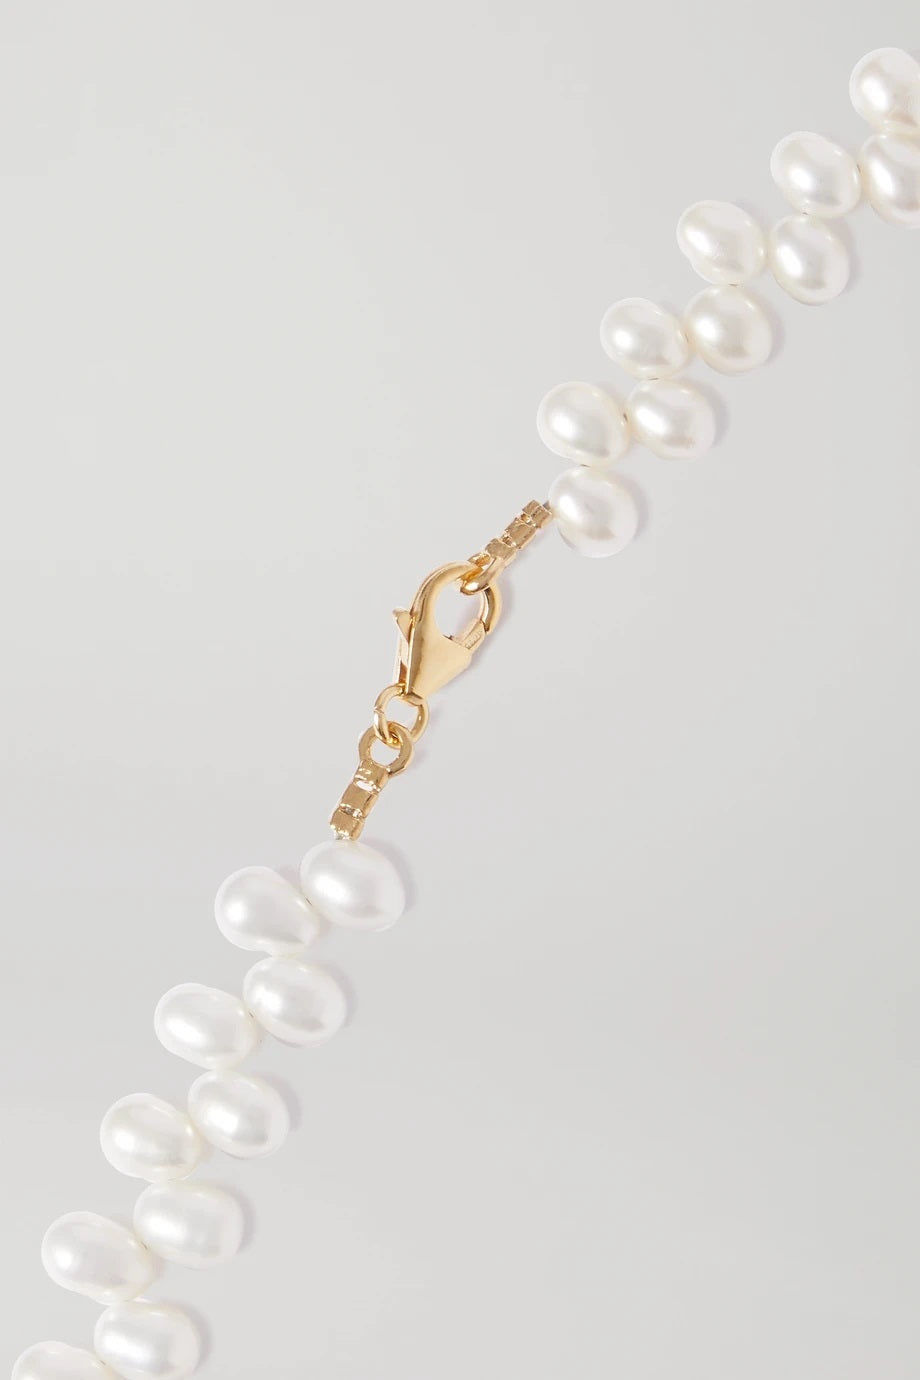 Natural pearl necklace with gold plated sterling silver details